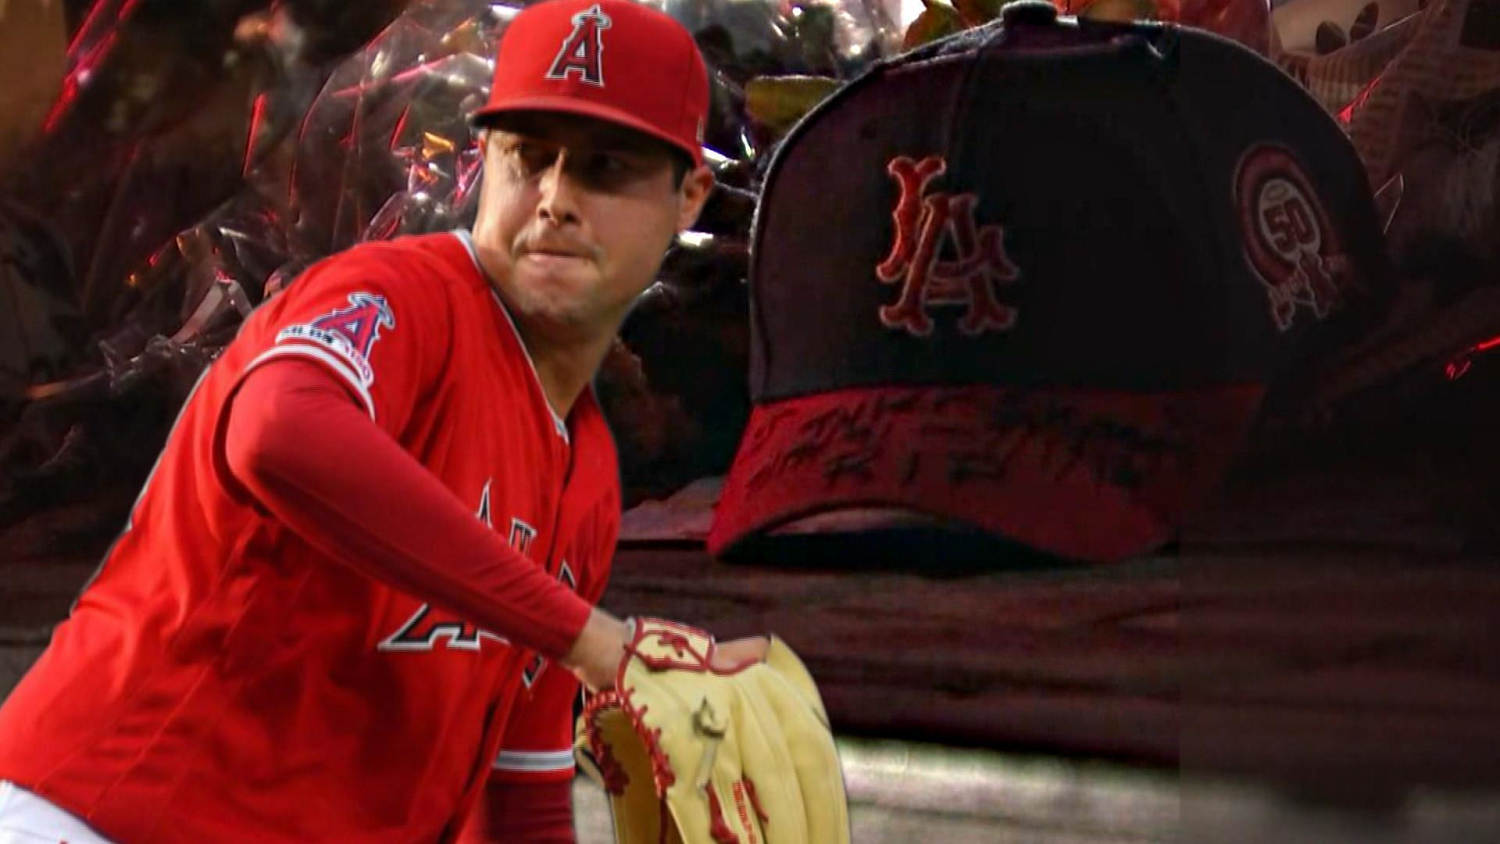 Los Angeles Angels pitcher Tyler Skaggs dead at 27 - ABC News